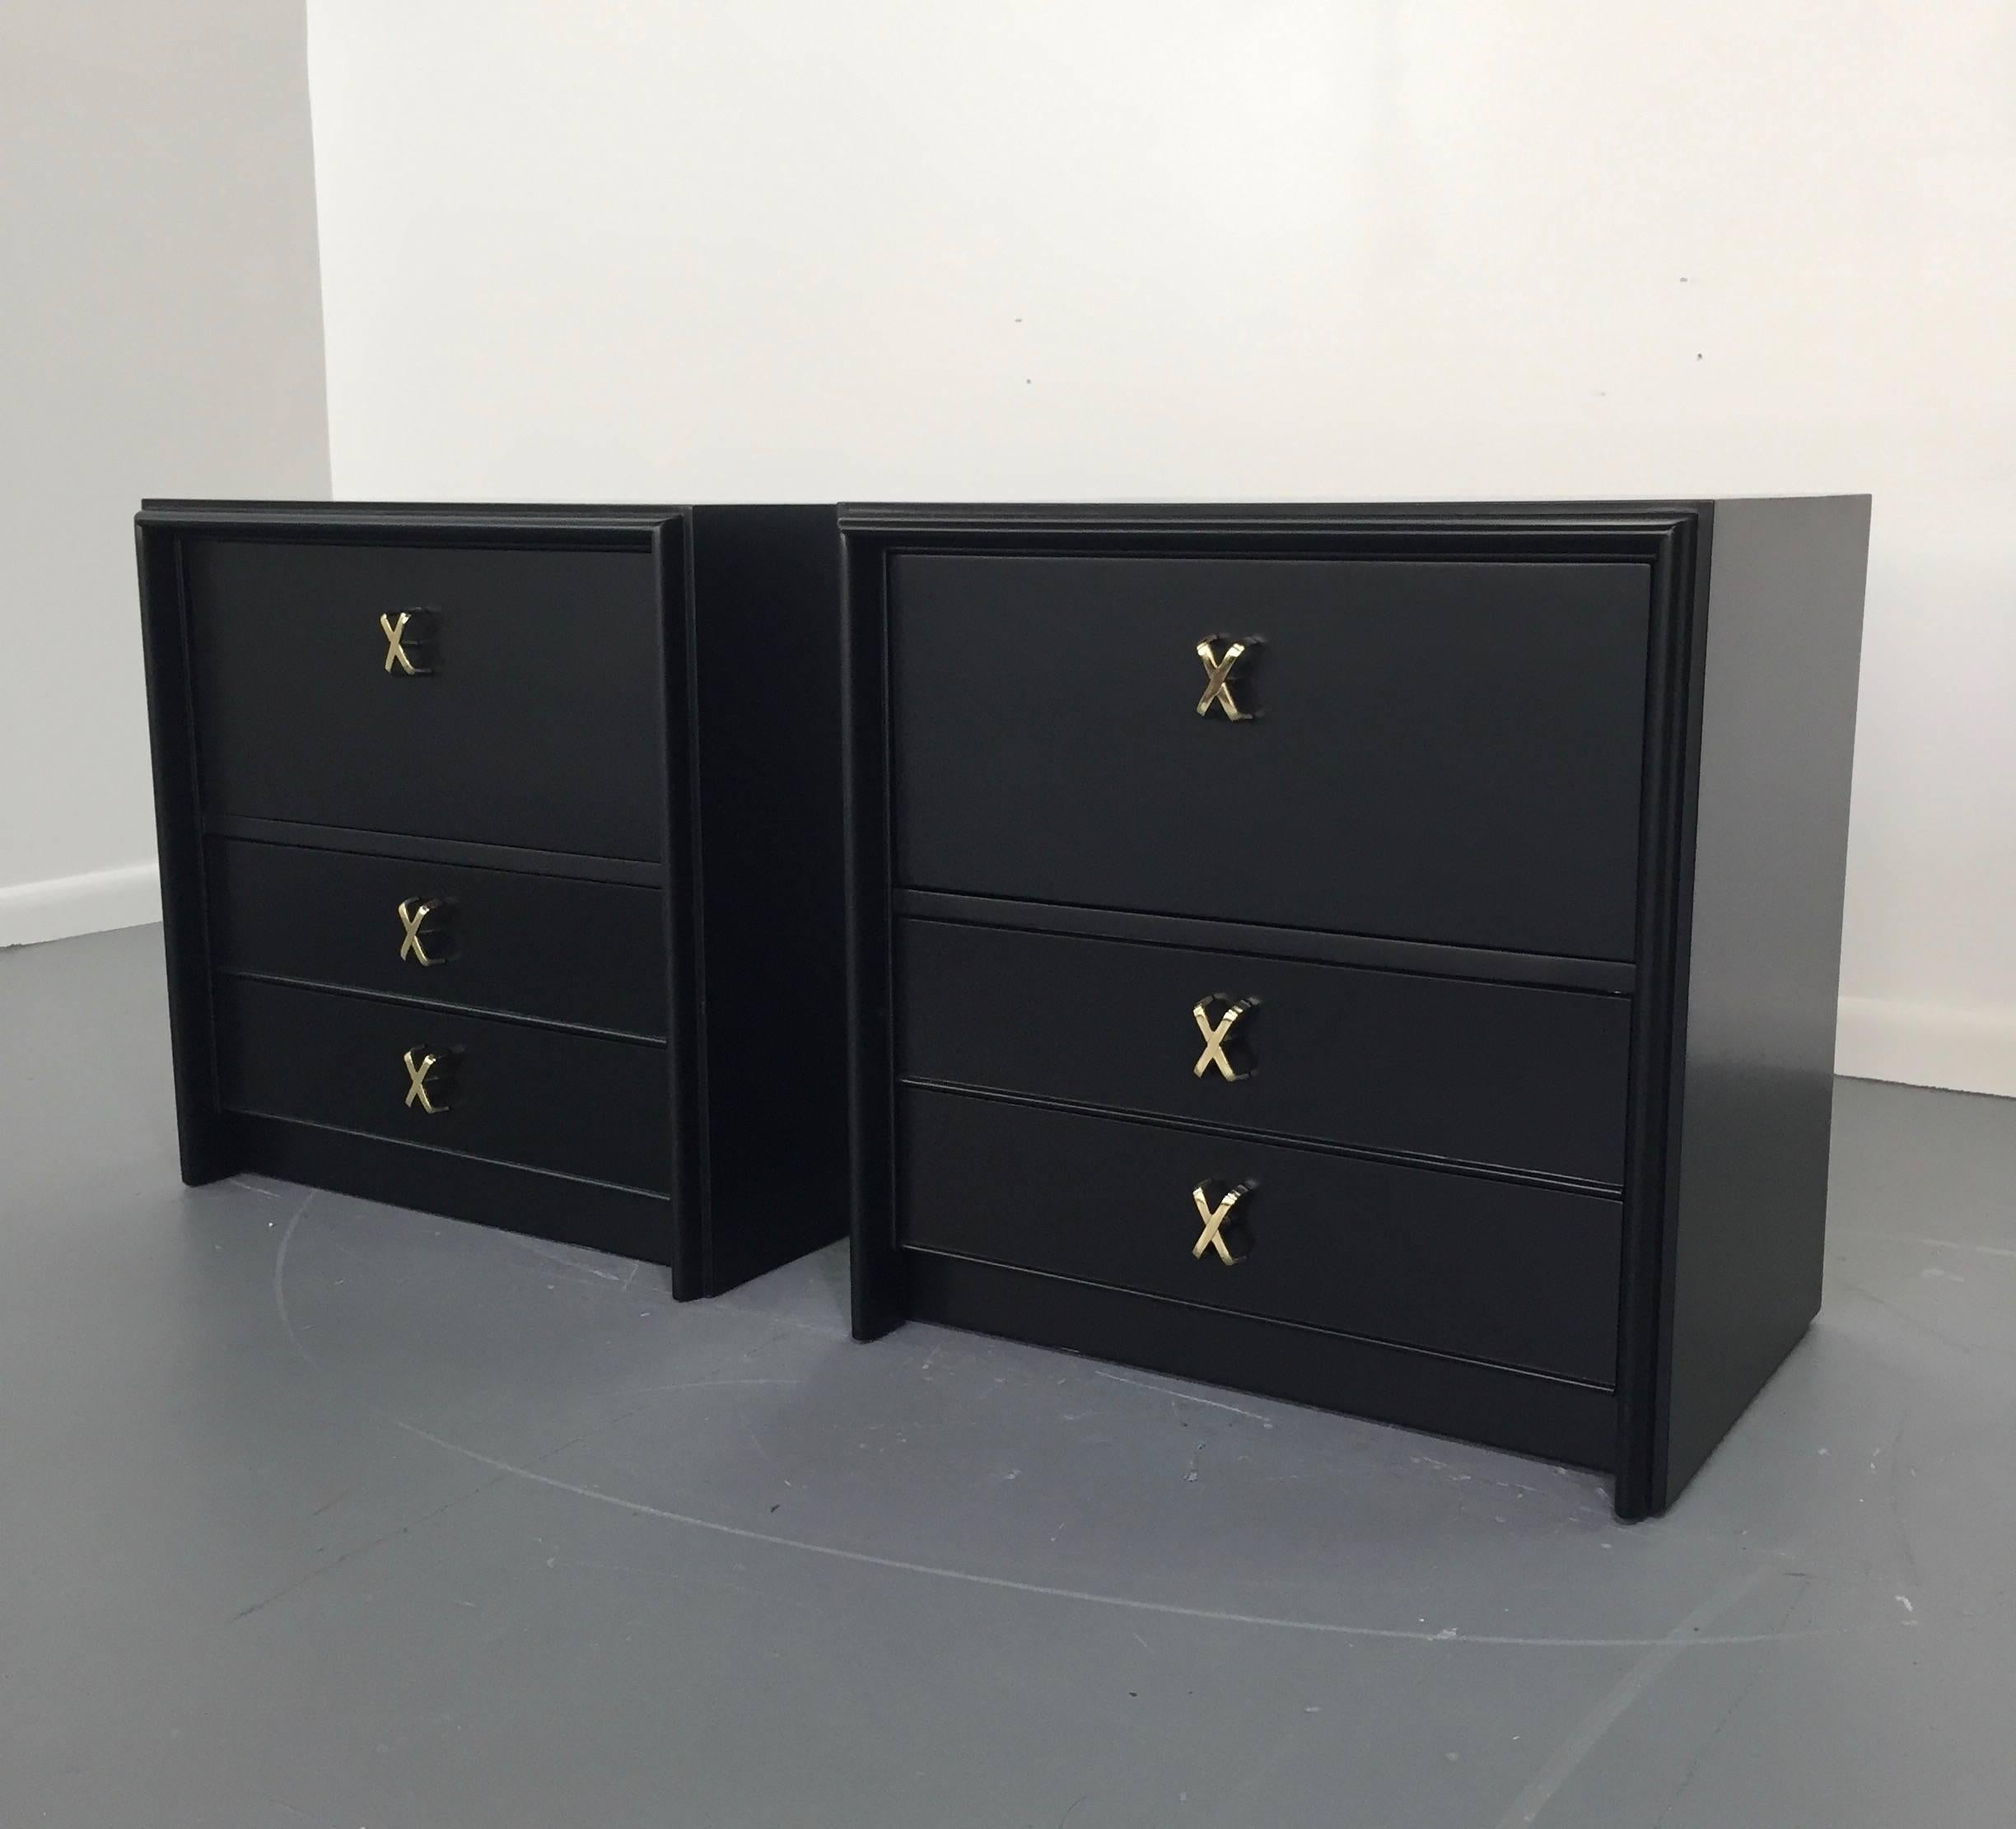 A pair of Paul Frankl designed for Johnson Furniture black lacquered side cabinets with brass-plated metalwork. 1950s stamped with makers mark. Fully reconditioned, top drawer is a fall front hinged shelf.

Paul Frank bridged the period of art deco